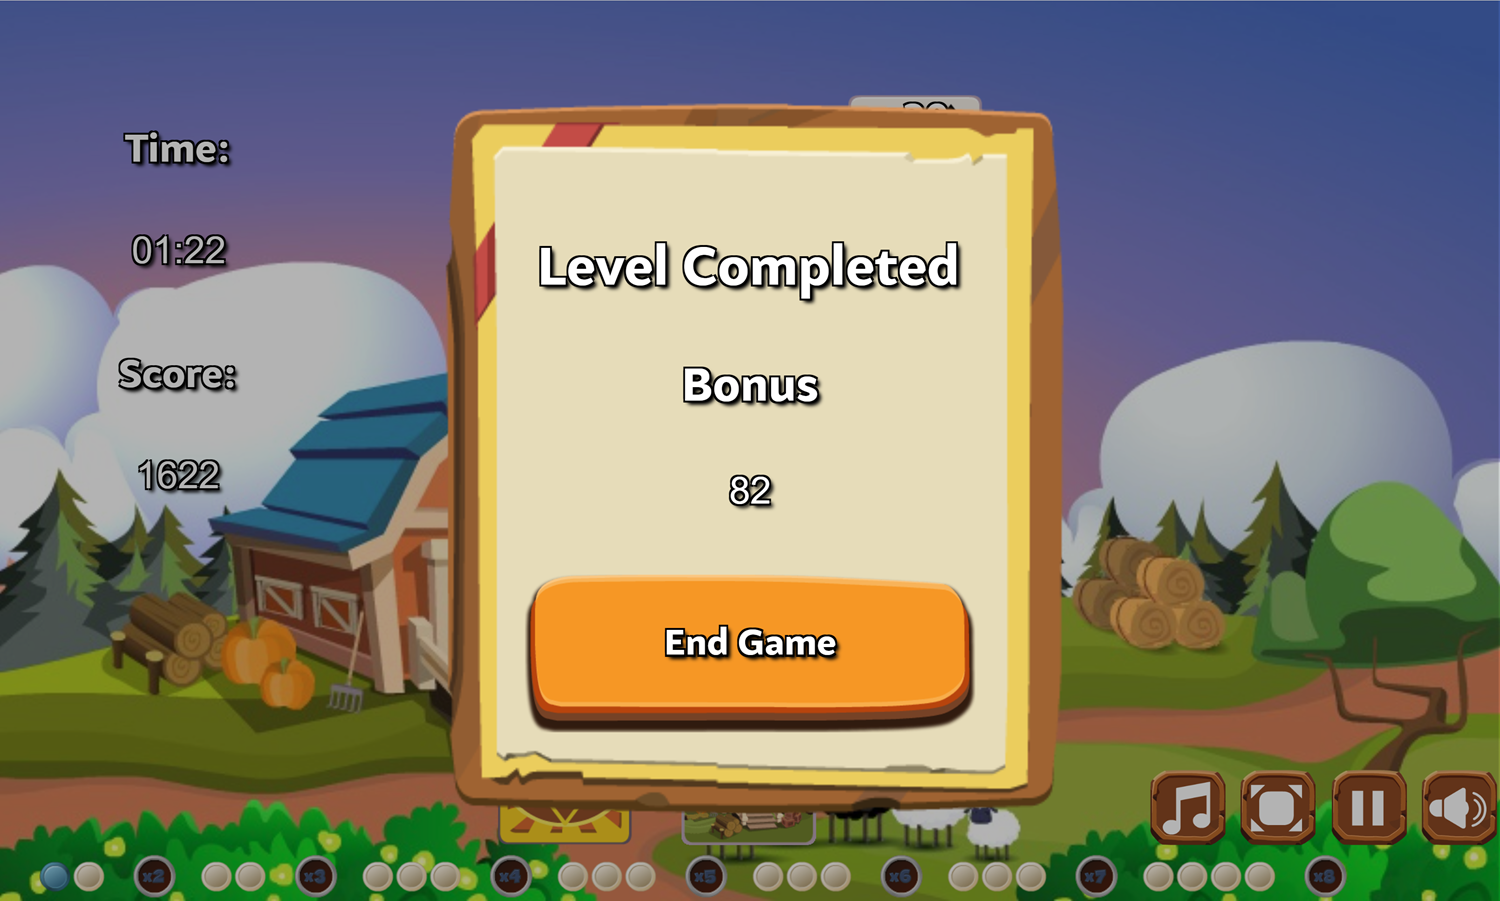 Tripeaks Farm Solitaire Game Level Completed Screen Screenshot.